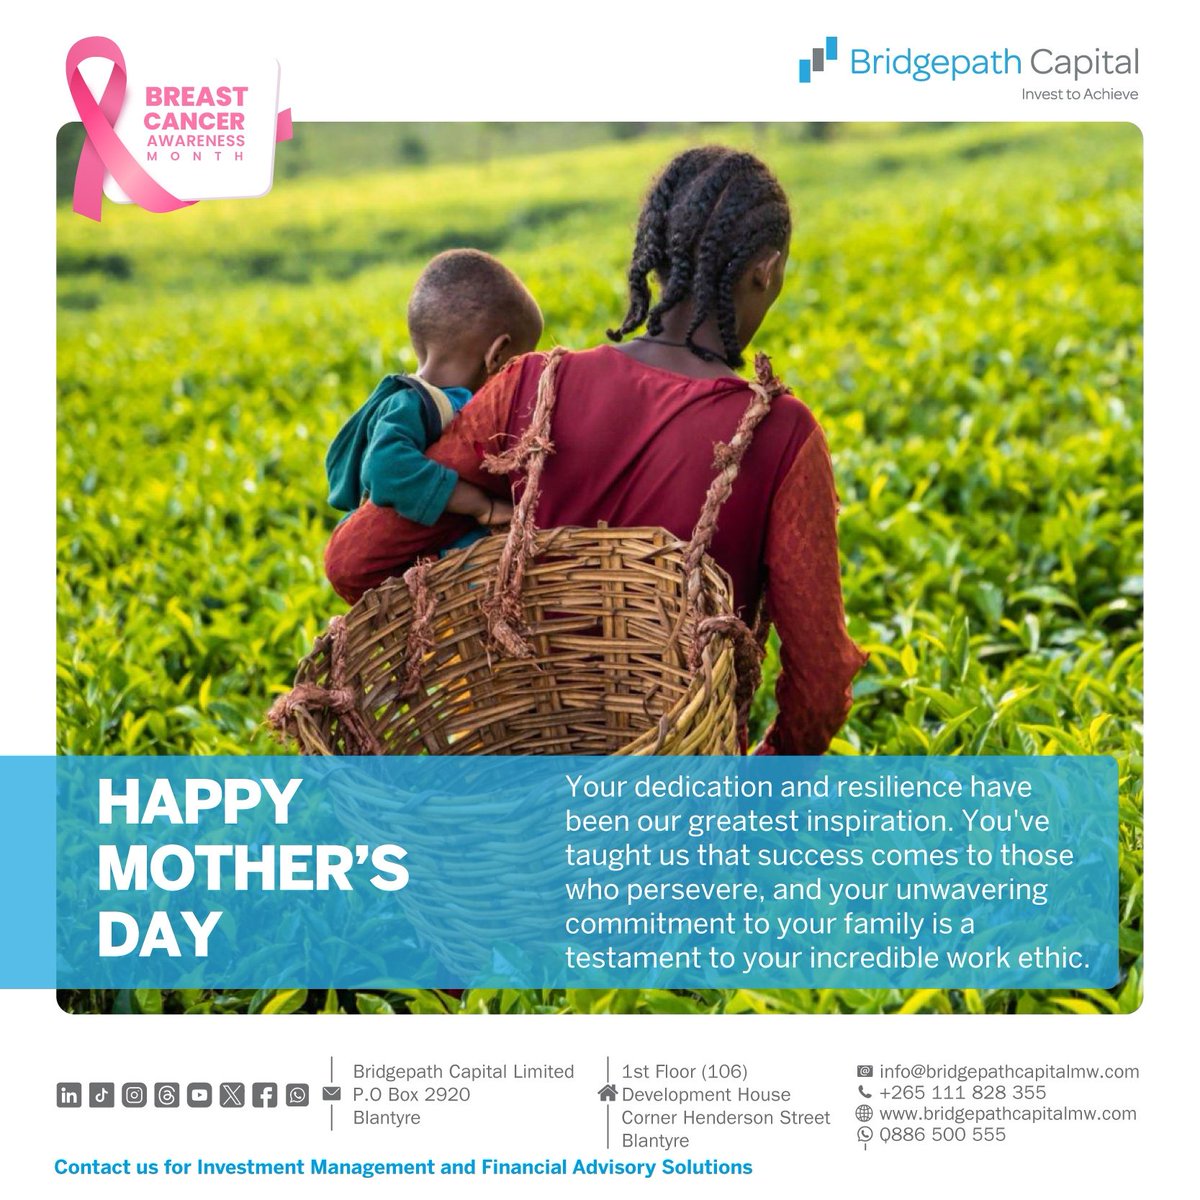 Every day should be Mother's Day, Happy mothers day 💖 !#Mothersday #CelebrateLove #InvestWithUs